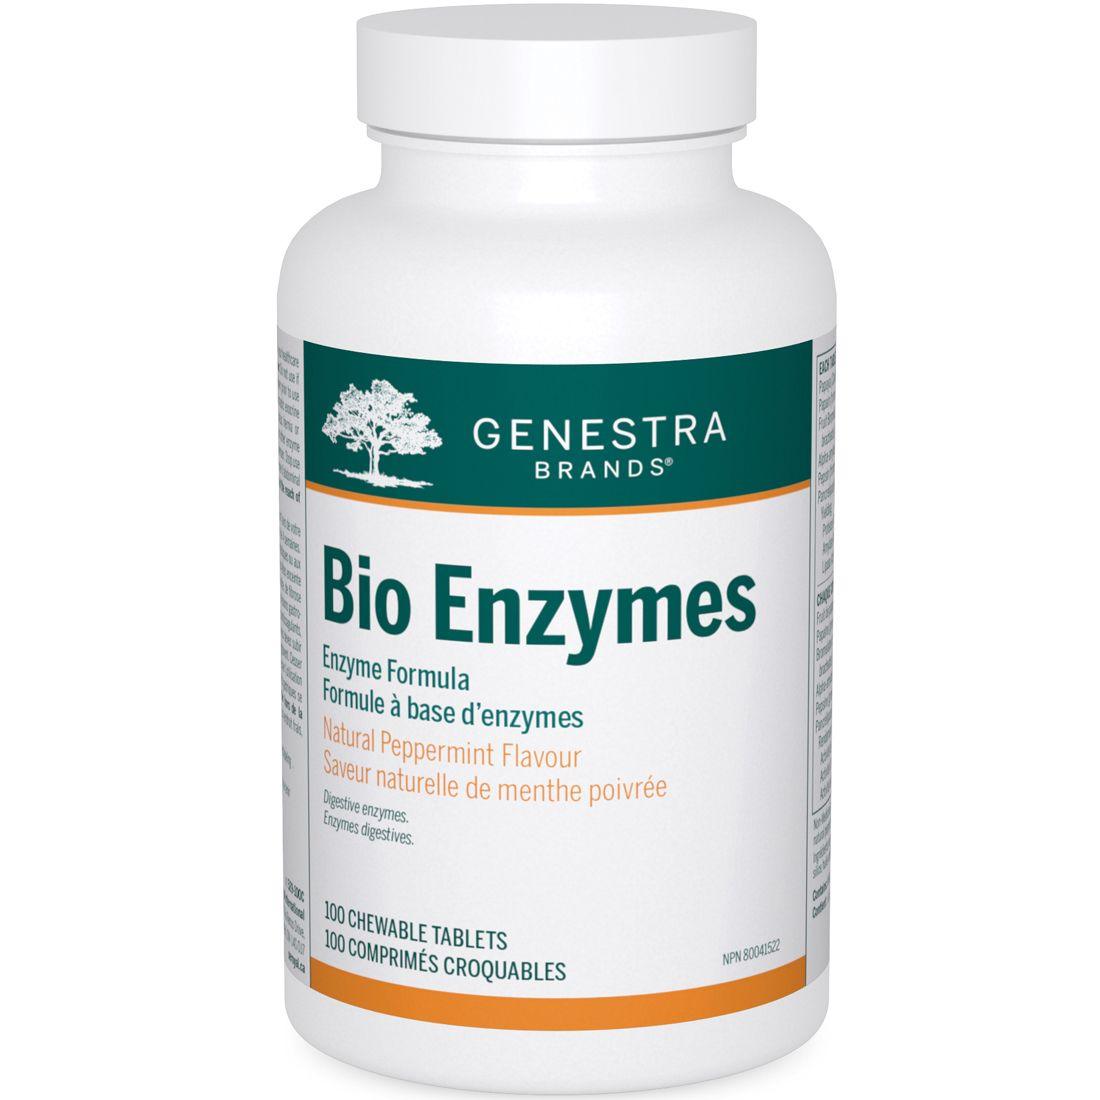 Genestra Bio Enzymes 100 Chewable Tabs Supplements - Digestive Enzymes at Village Vitamin Store